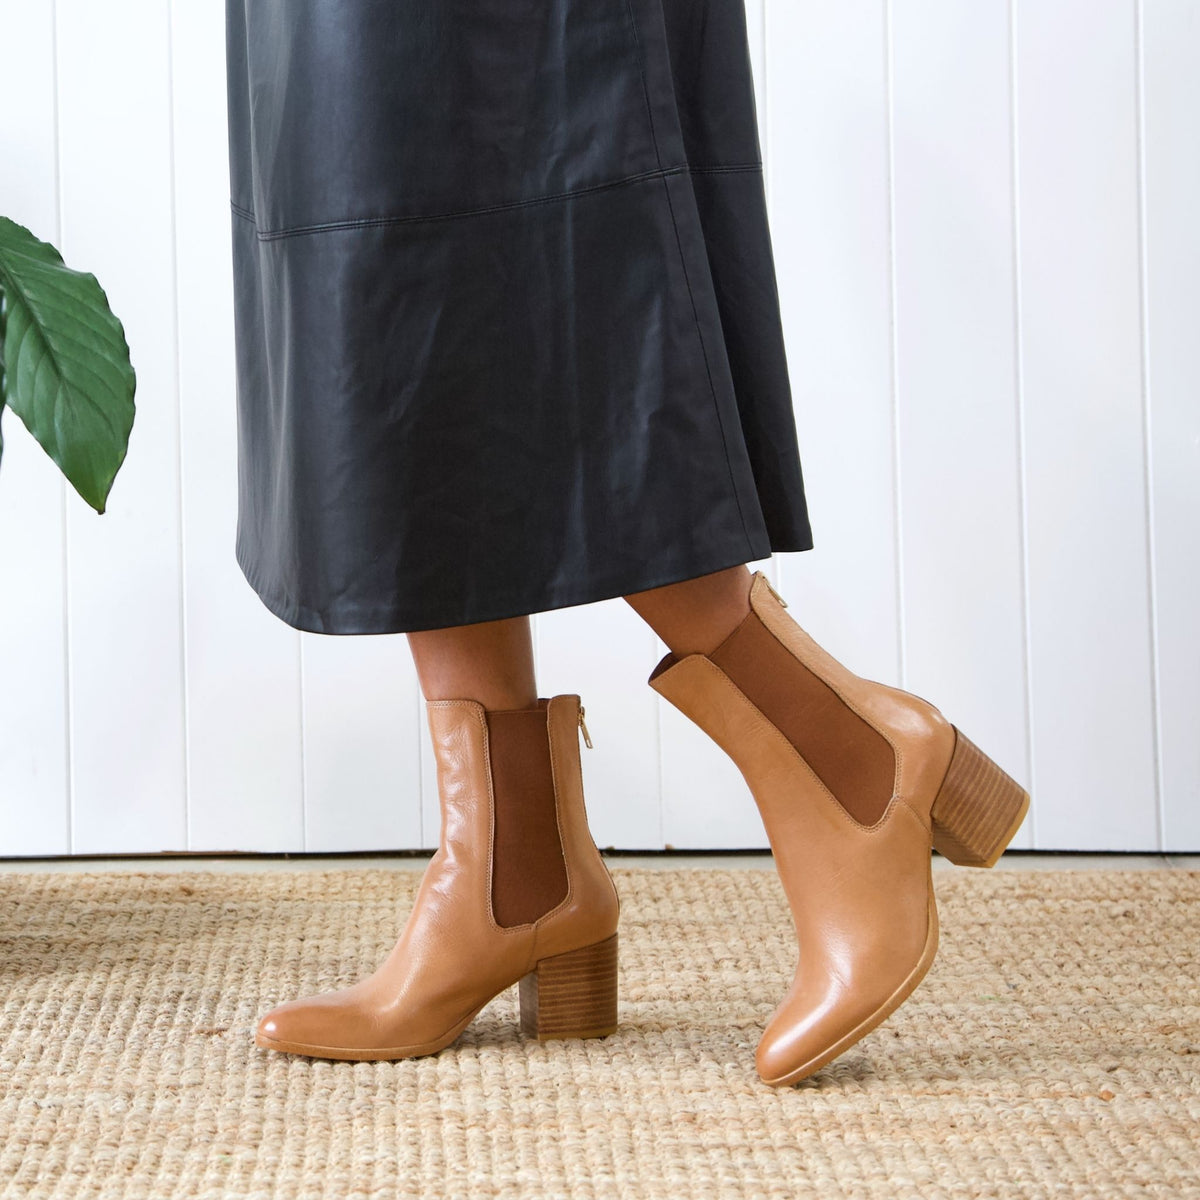 Zoltan Tan Leather Chelsea Boots